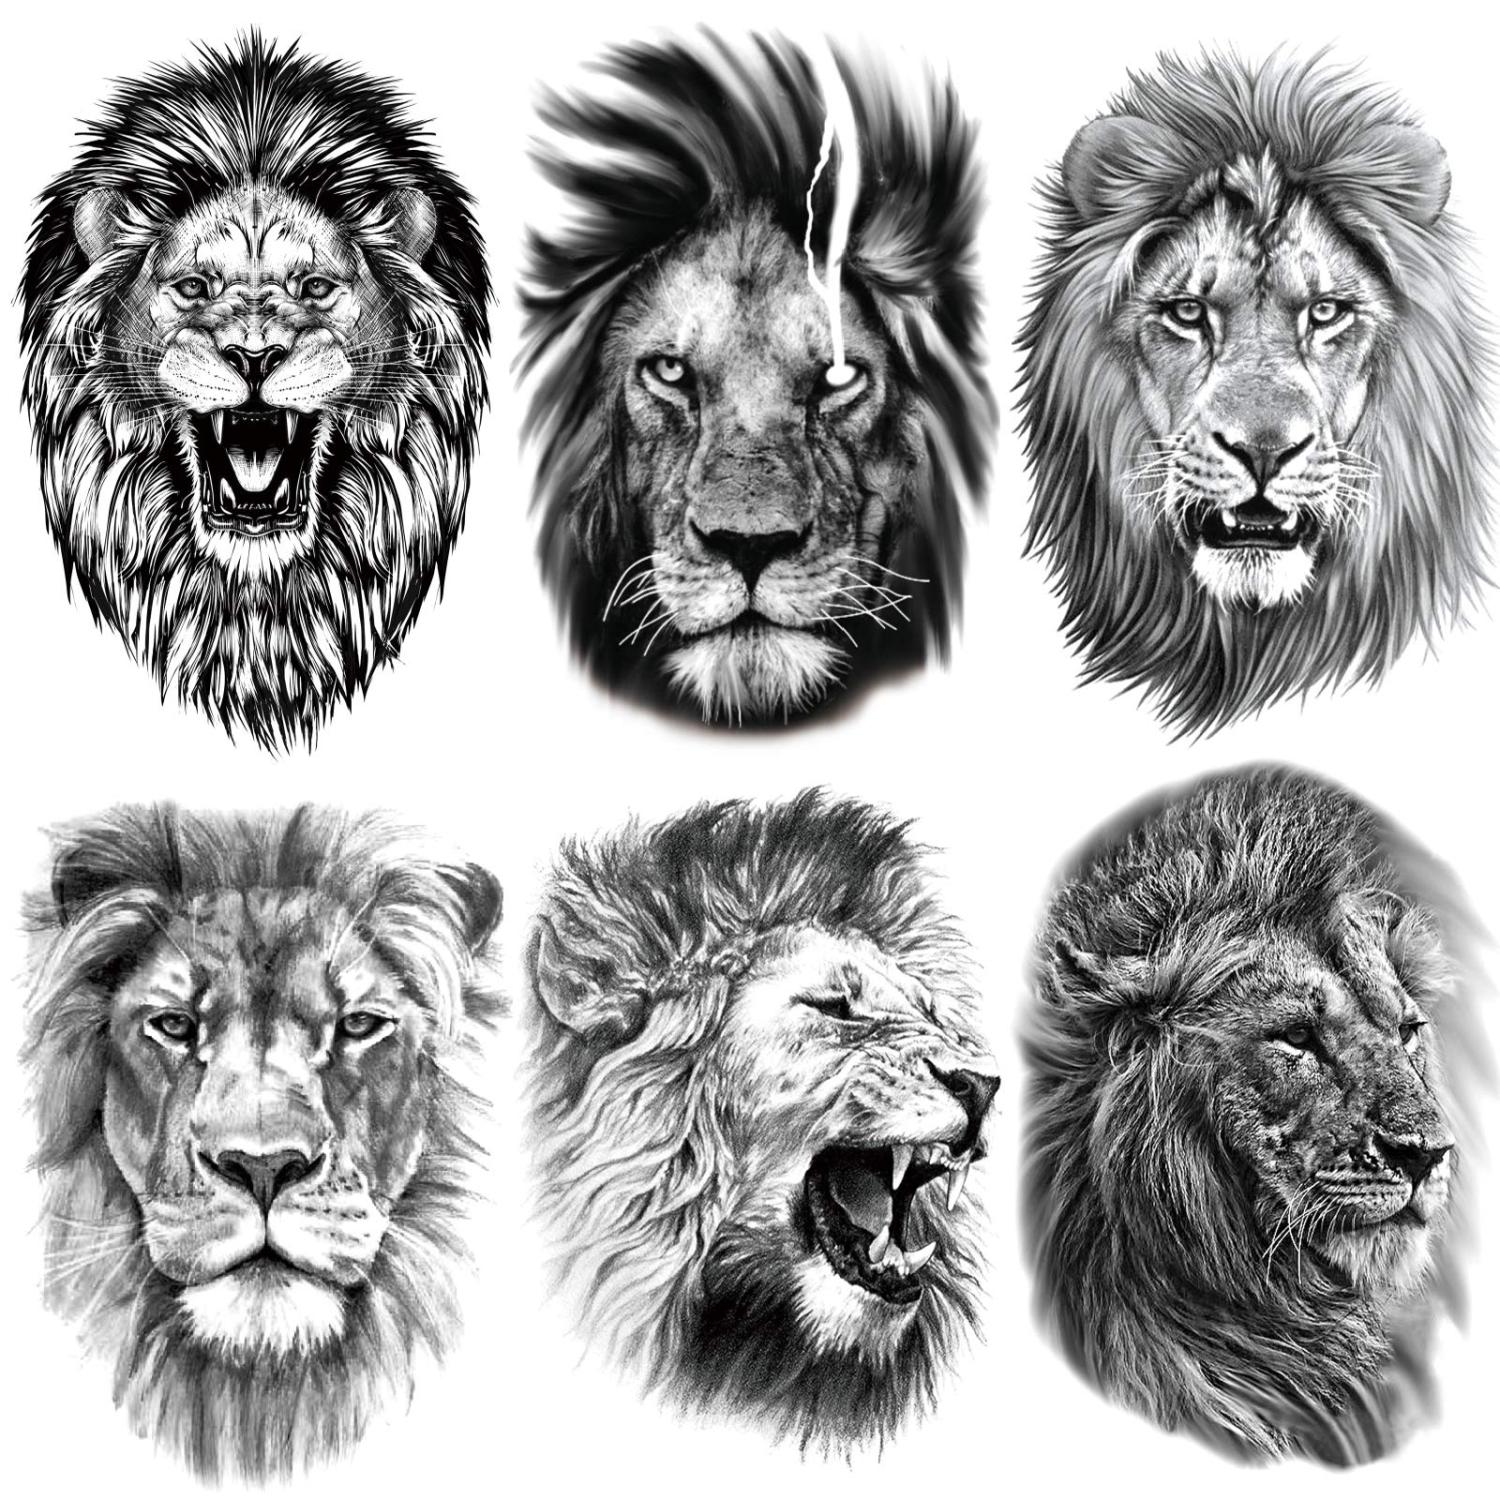 Kotbs 6 Sheets Large 3D Black Lion Face Temporary Tattoos for Men Women, Half Arm Sleeve Tattoo Stickers for Teens Adults, Waterproof Black Lion King Fake Tatoo Lions Black (6 Sheets)